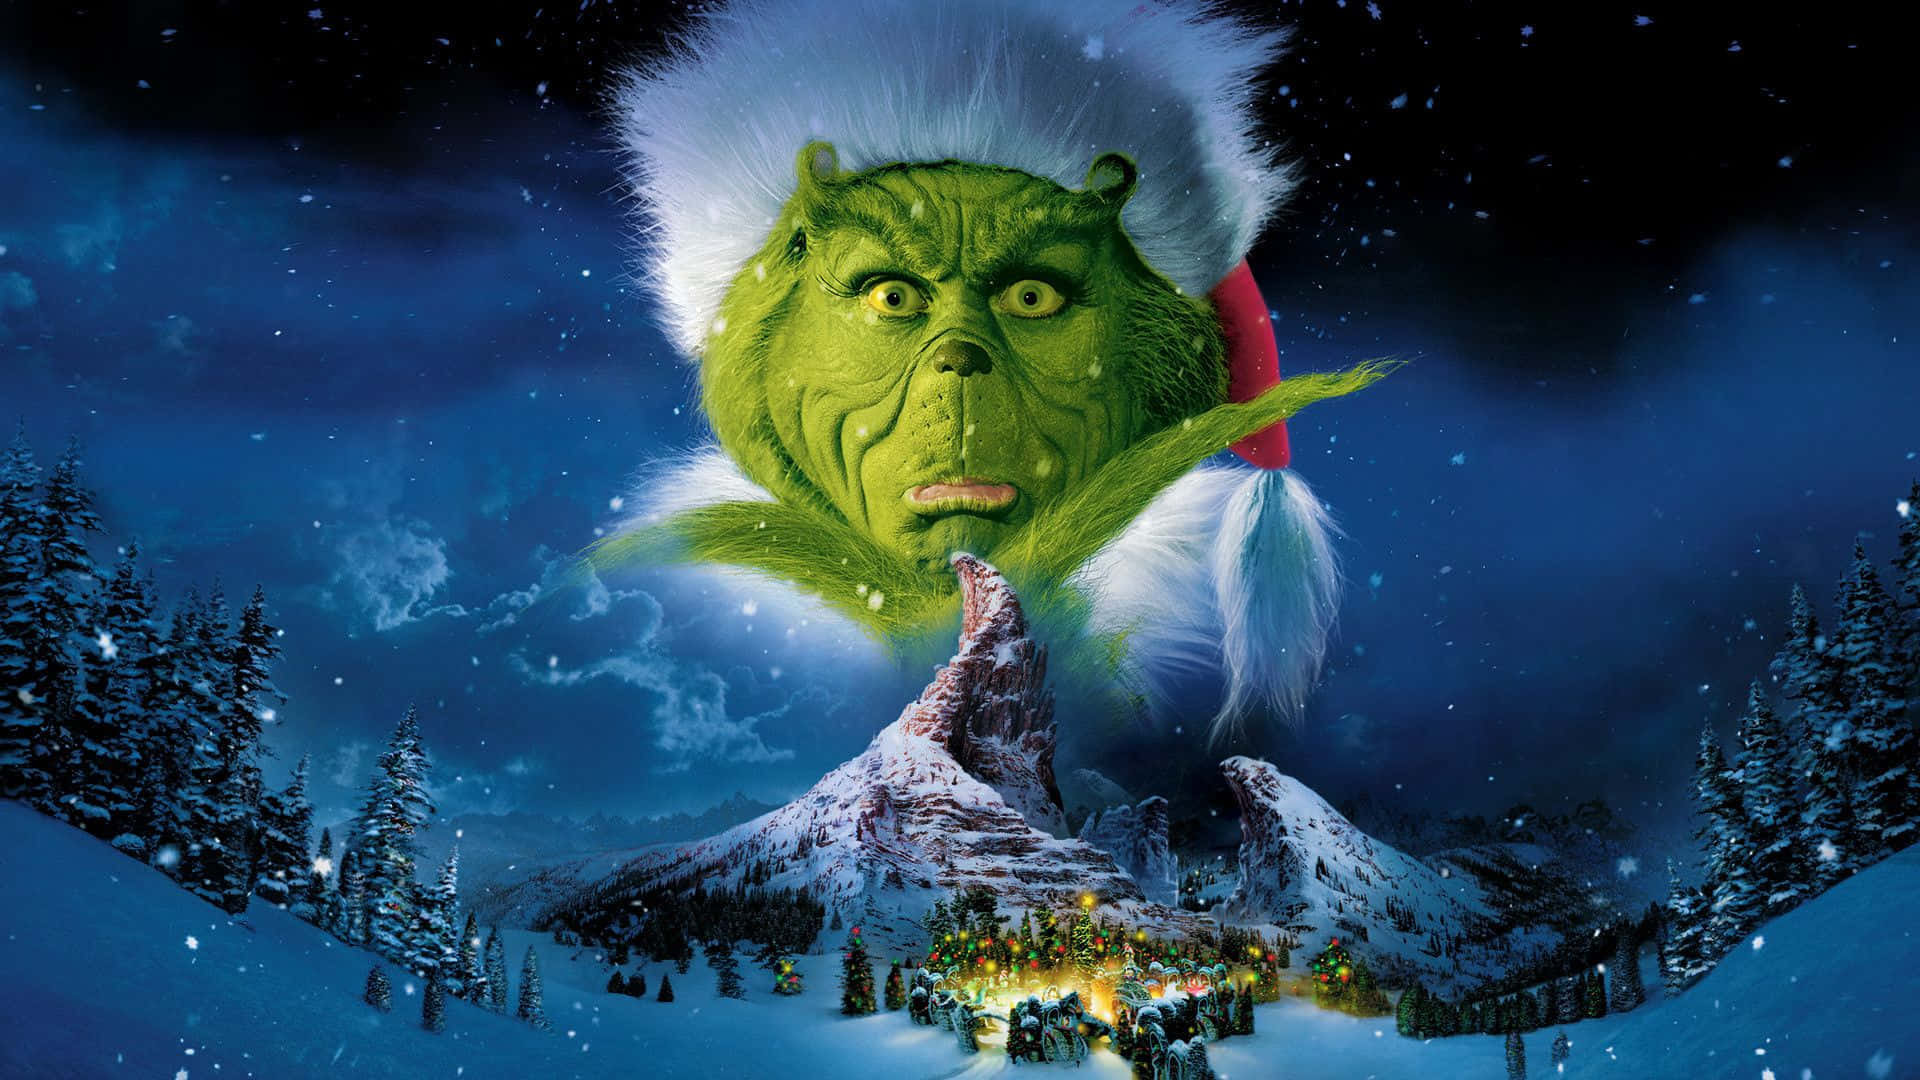 The Grinch In The Snow Wallpaper